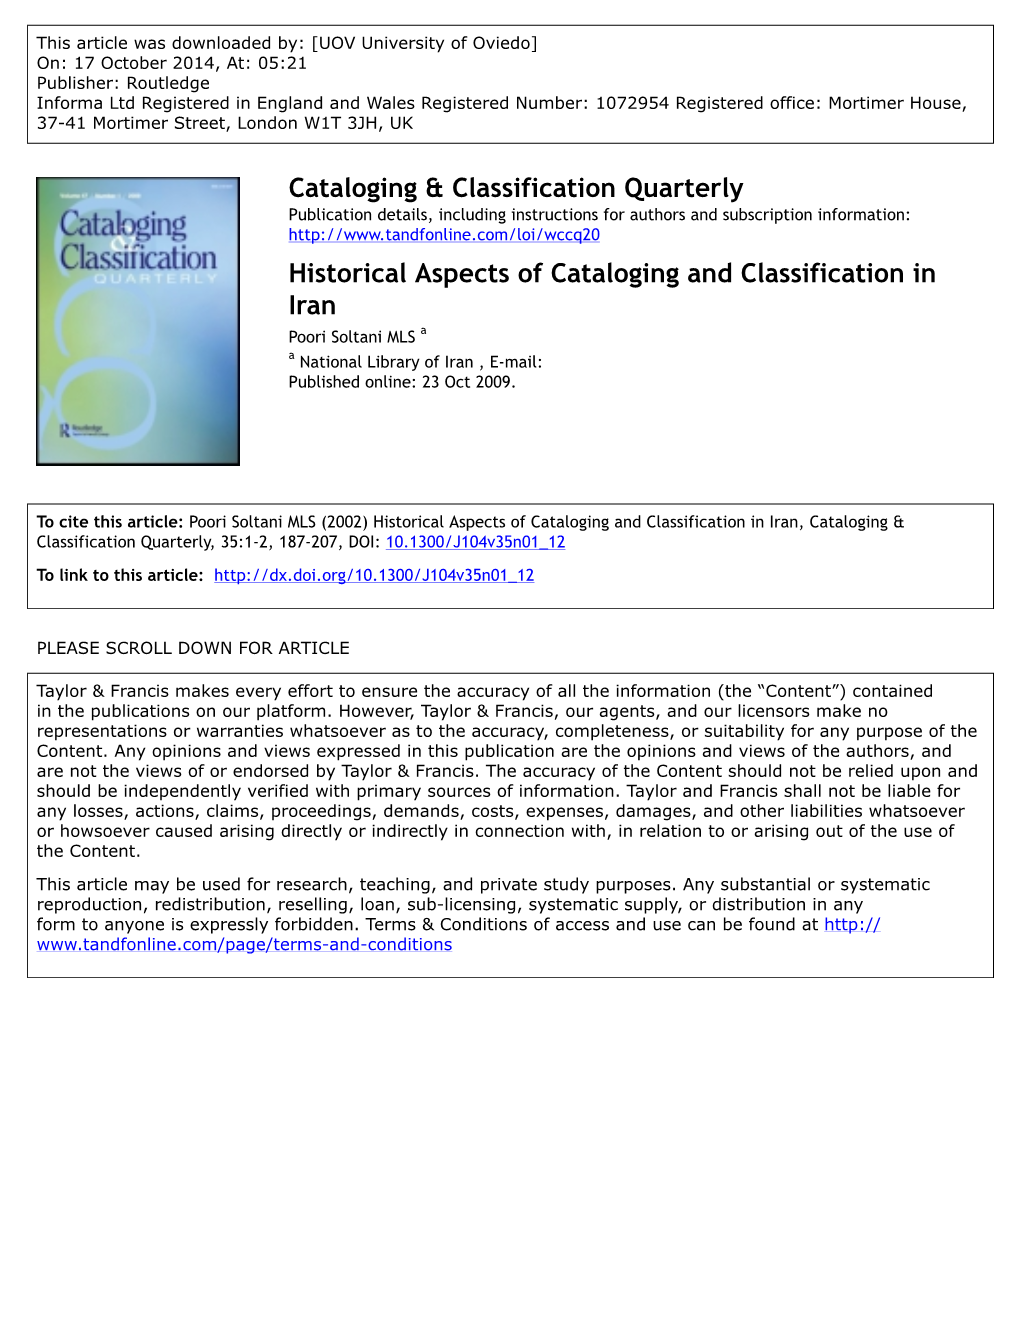 Cataloging & Classification Quarterly Historical Aspects of Cataloging